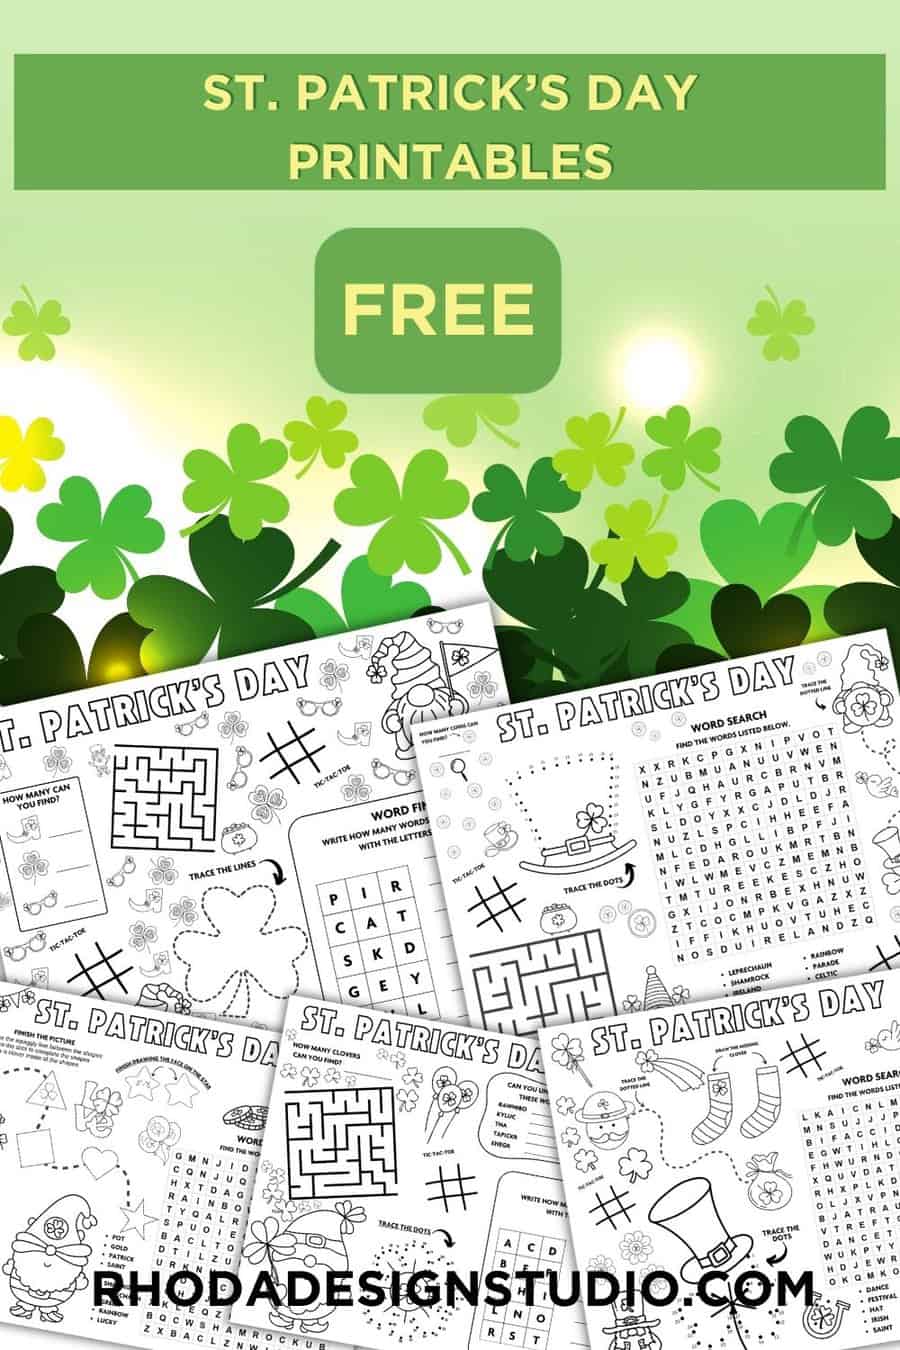 Lucky Finds: Free St. Patrick’s Day Printables Galore